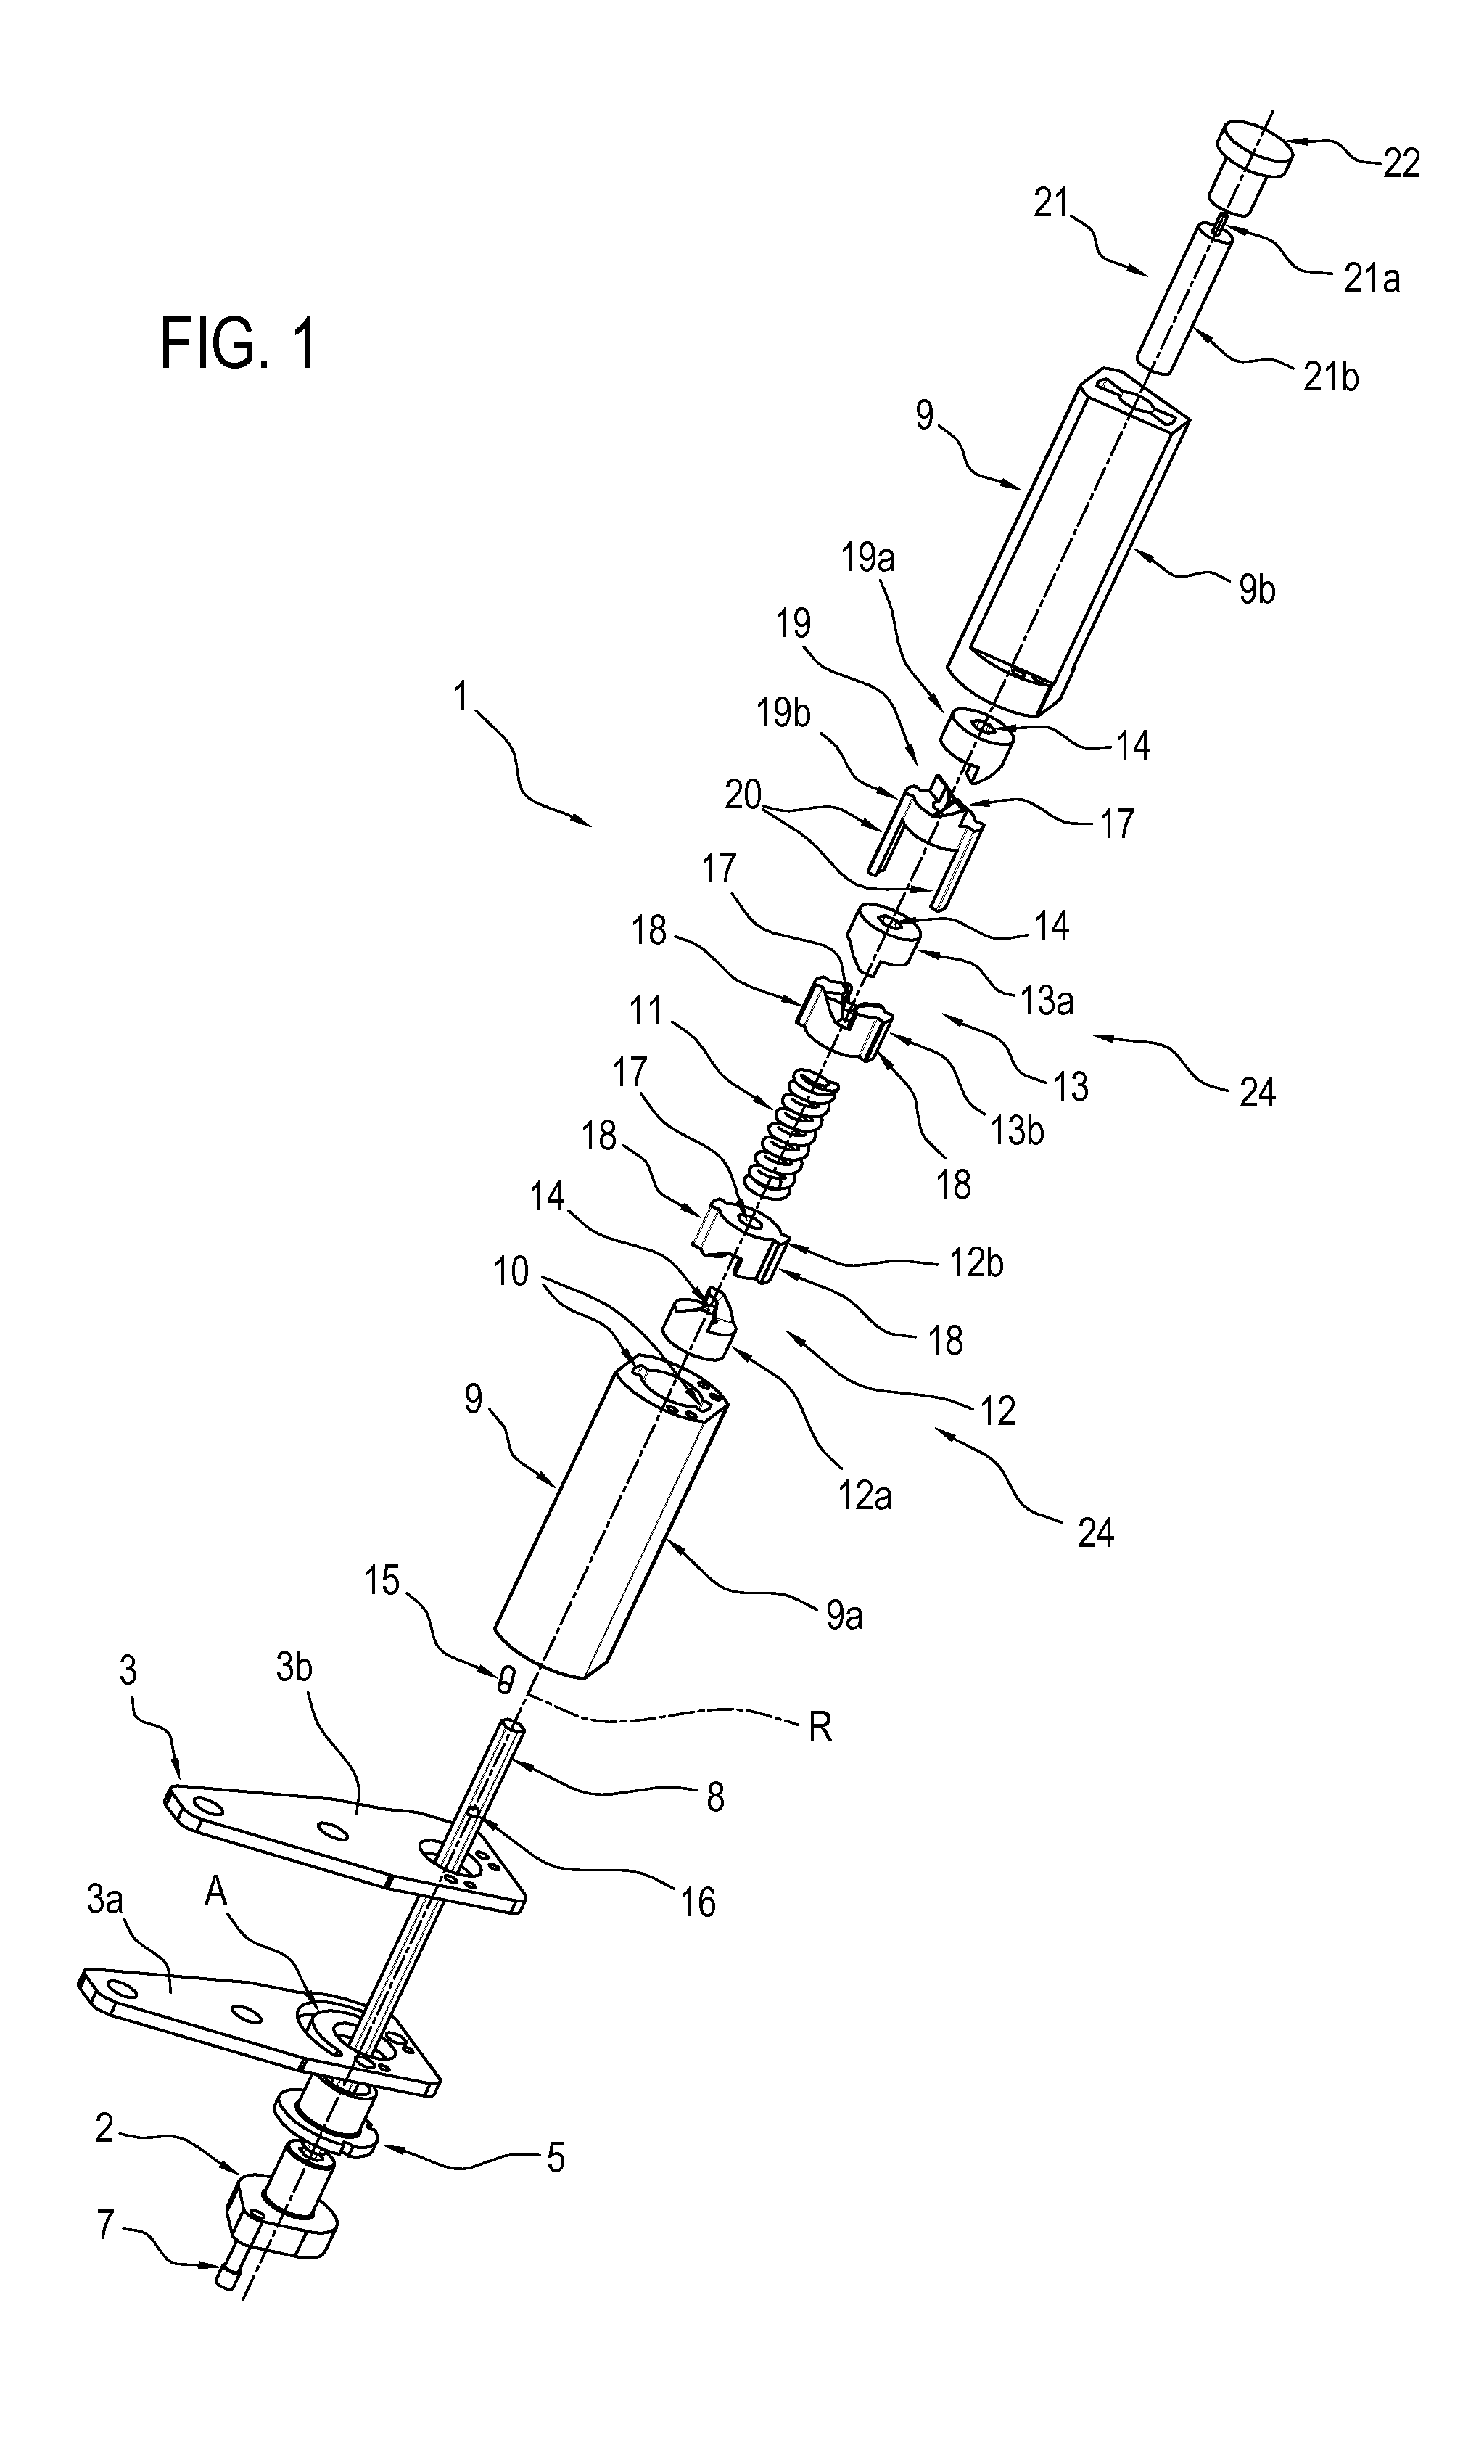 Hinge for doors of electrical household appliances